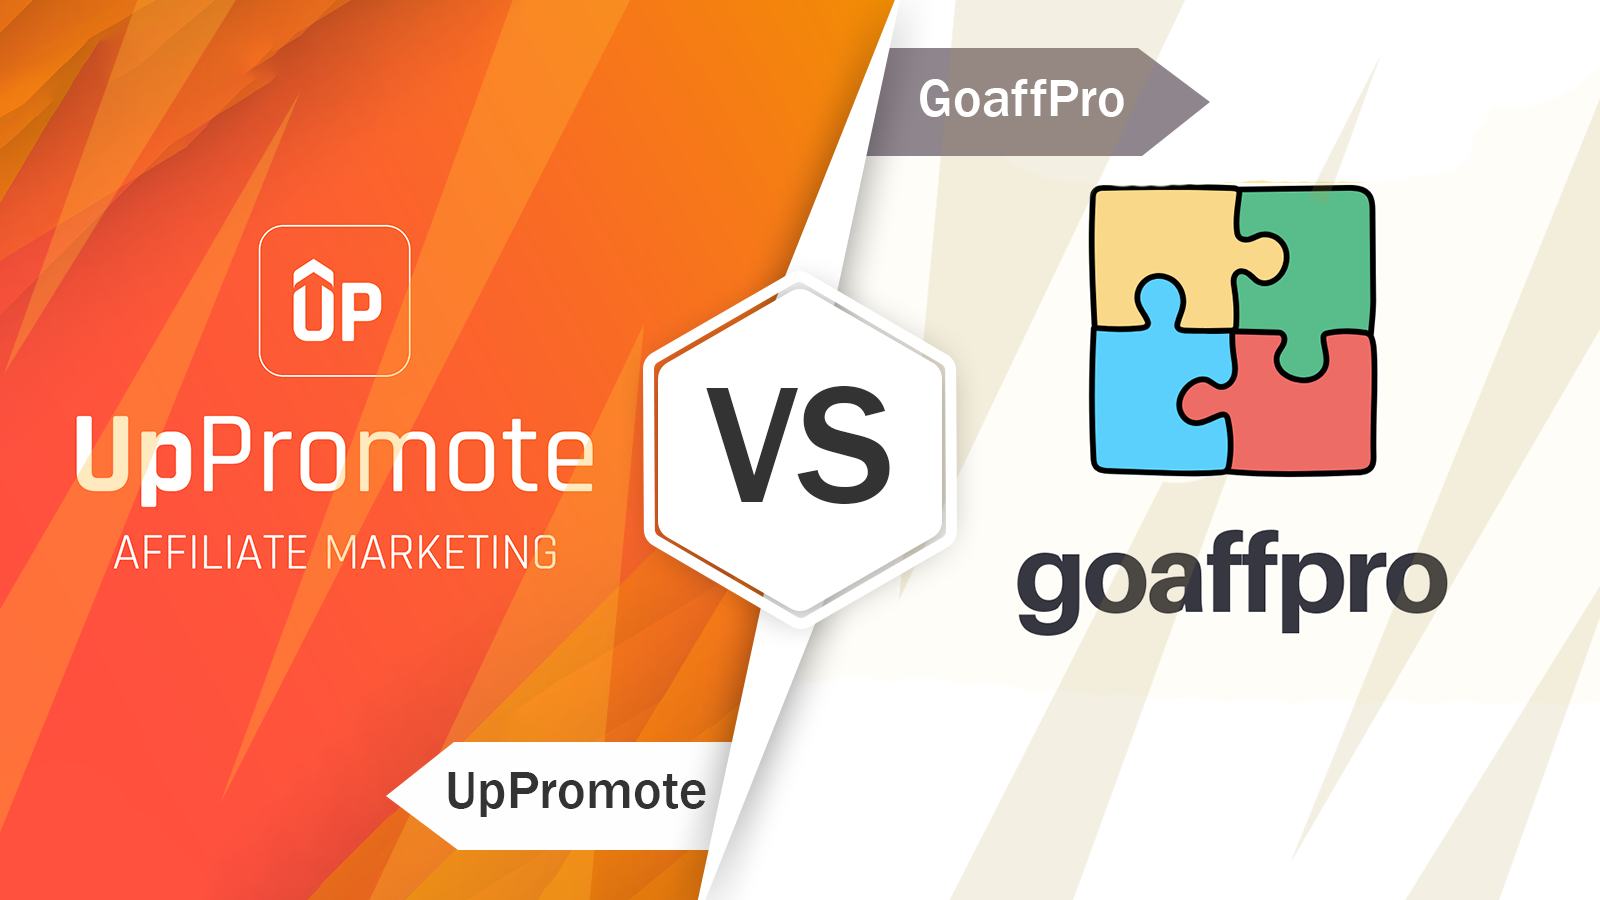 UpPromote: A great alternative to GoaffPro